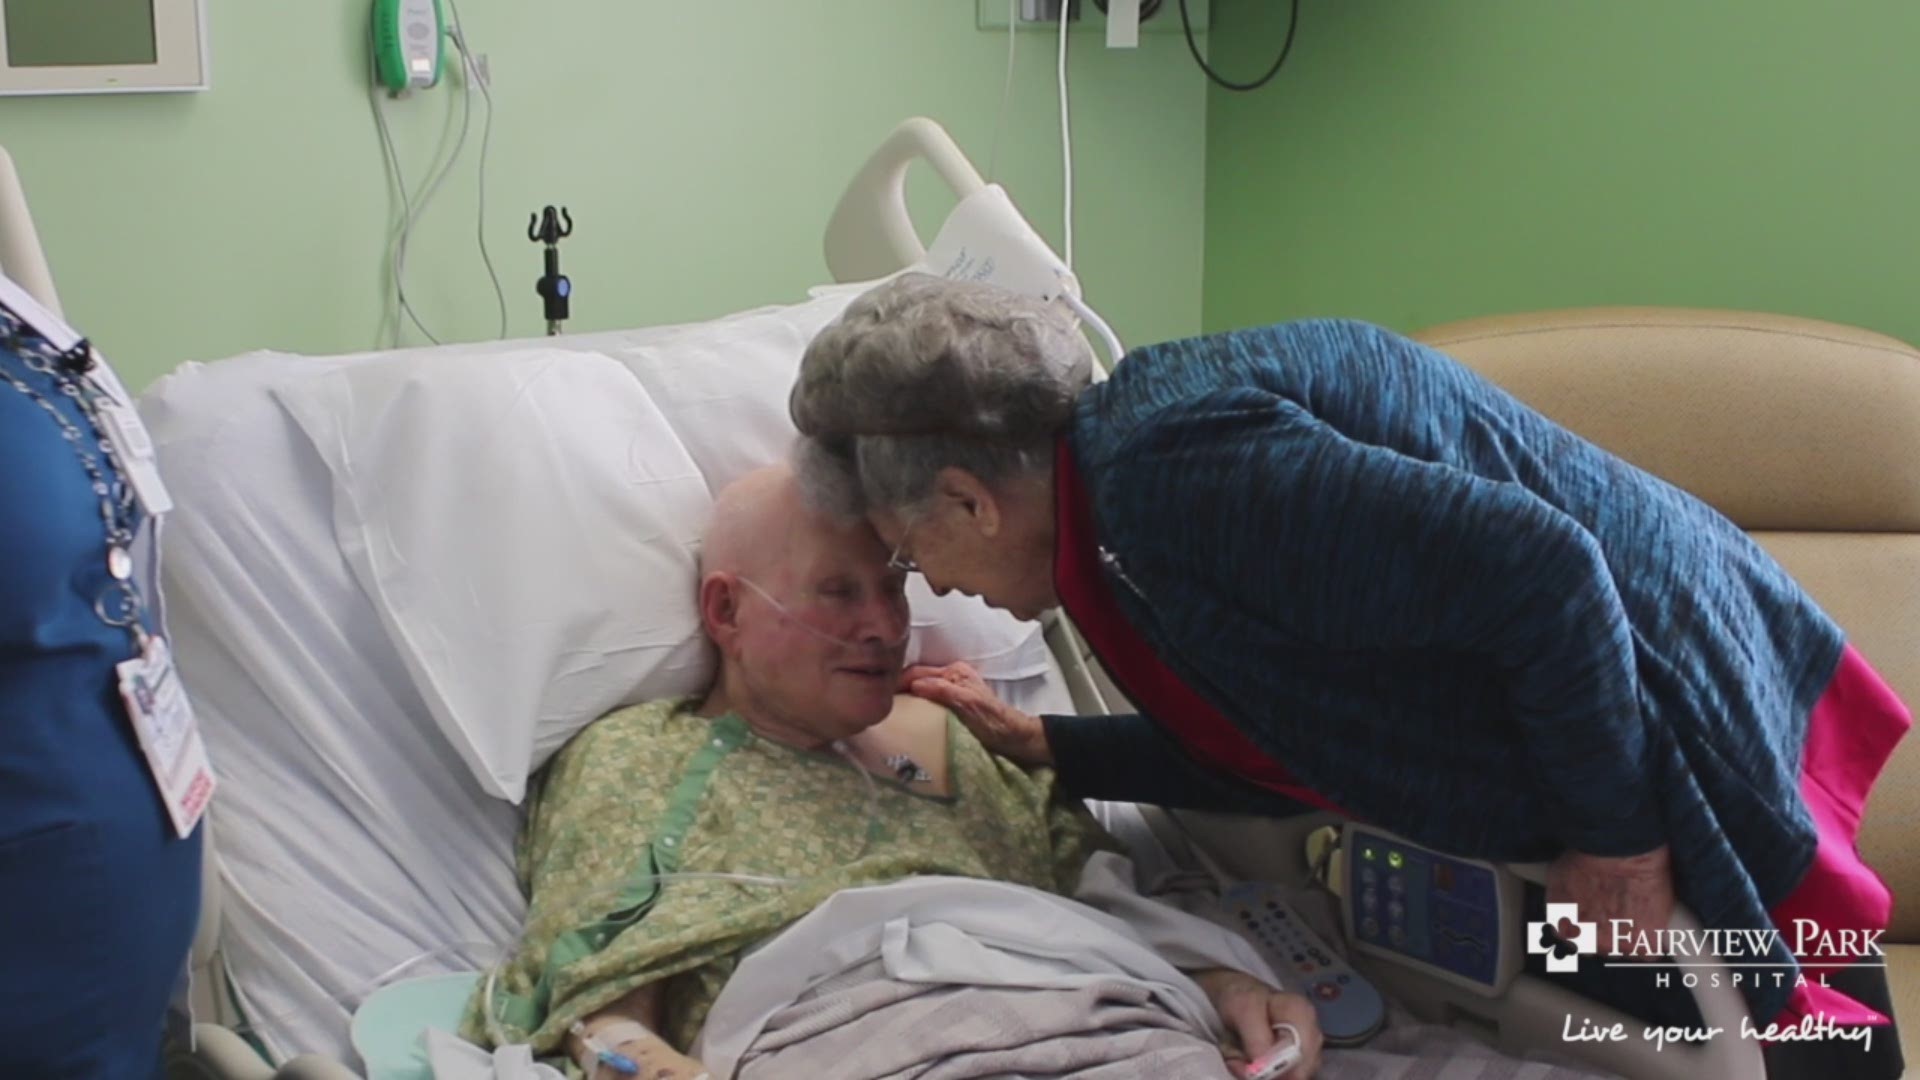 Hospital nurses and staff stepped in to help the John and his wife, Maggie, commemorate 65 years of love together.